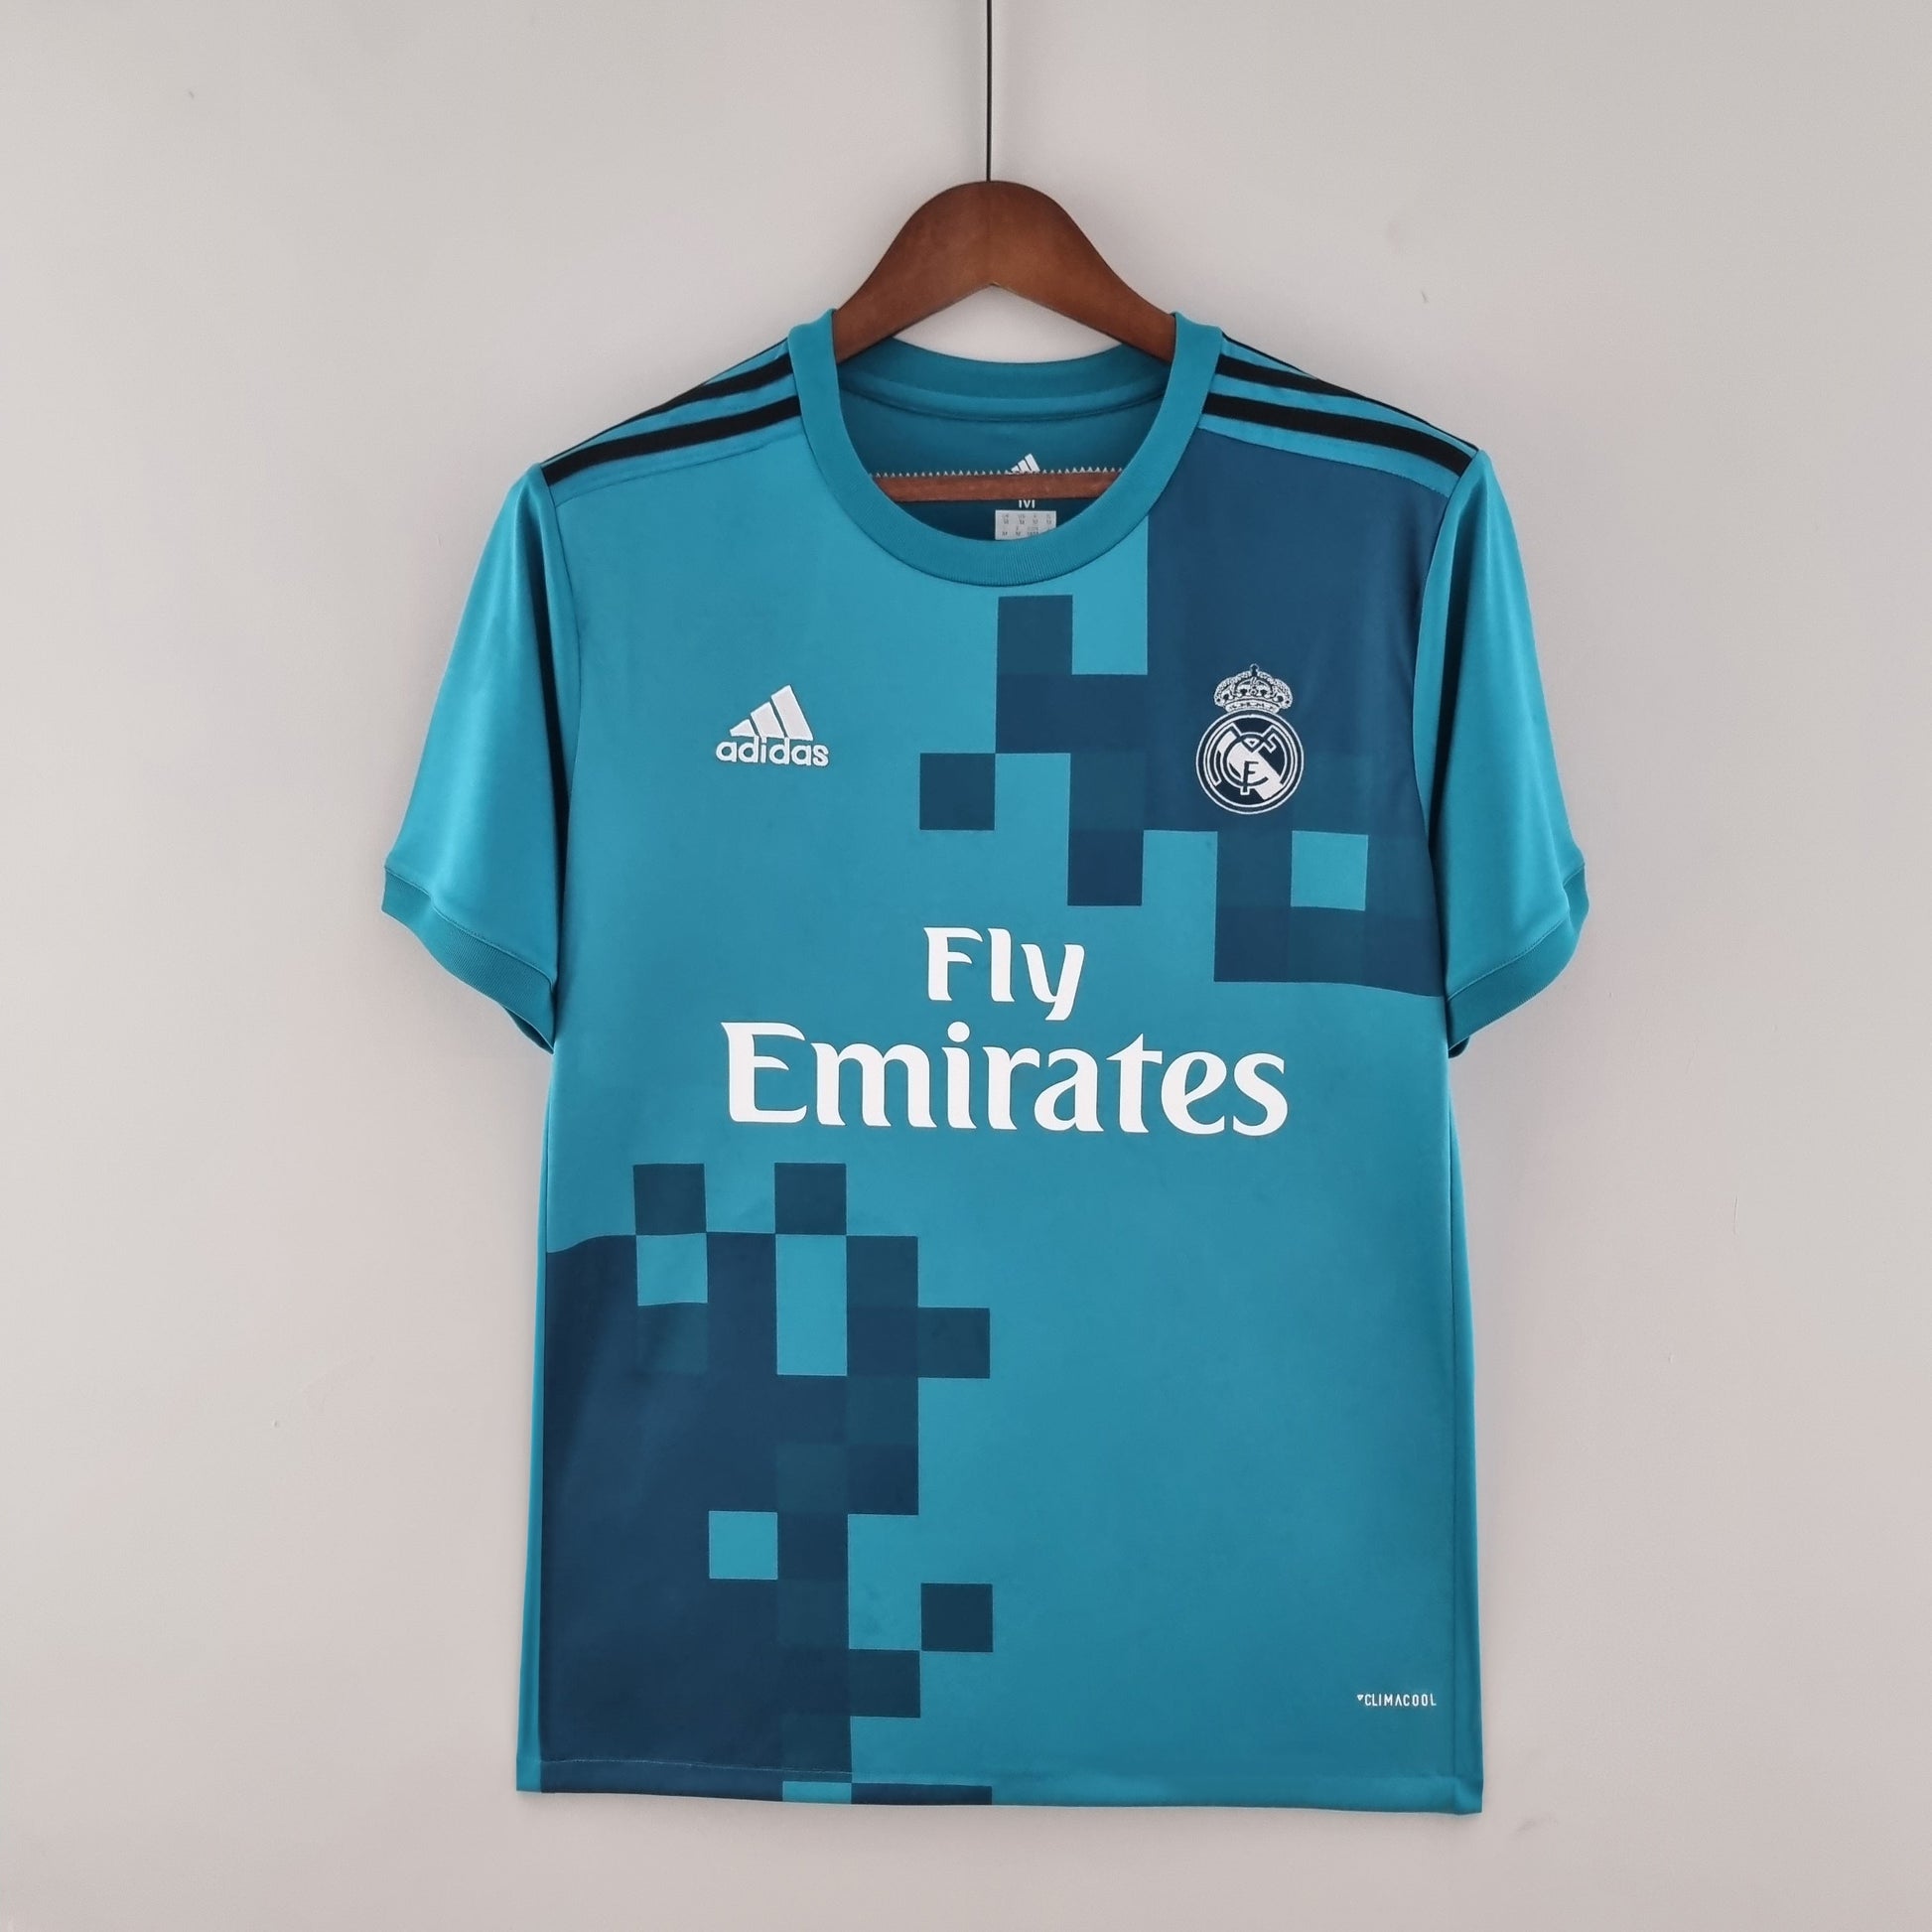 ADIDAS REAL MADRID 2018 3RD JERSEY teal blue